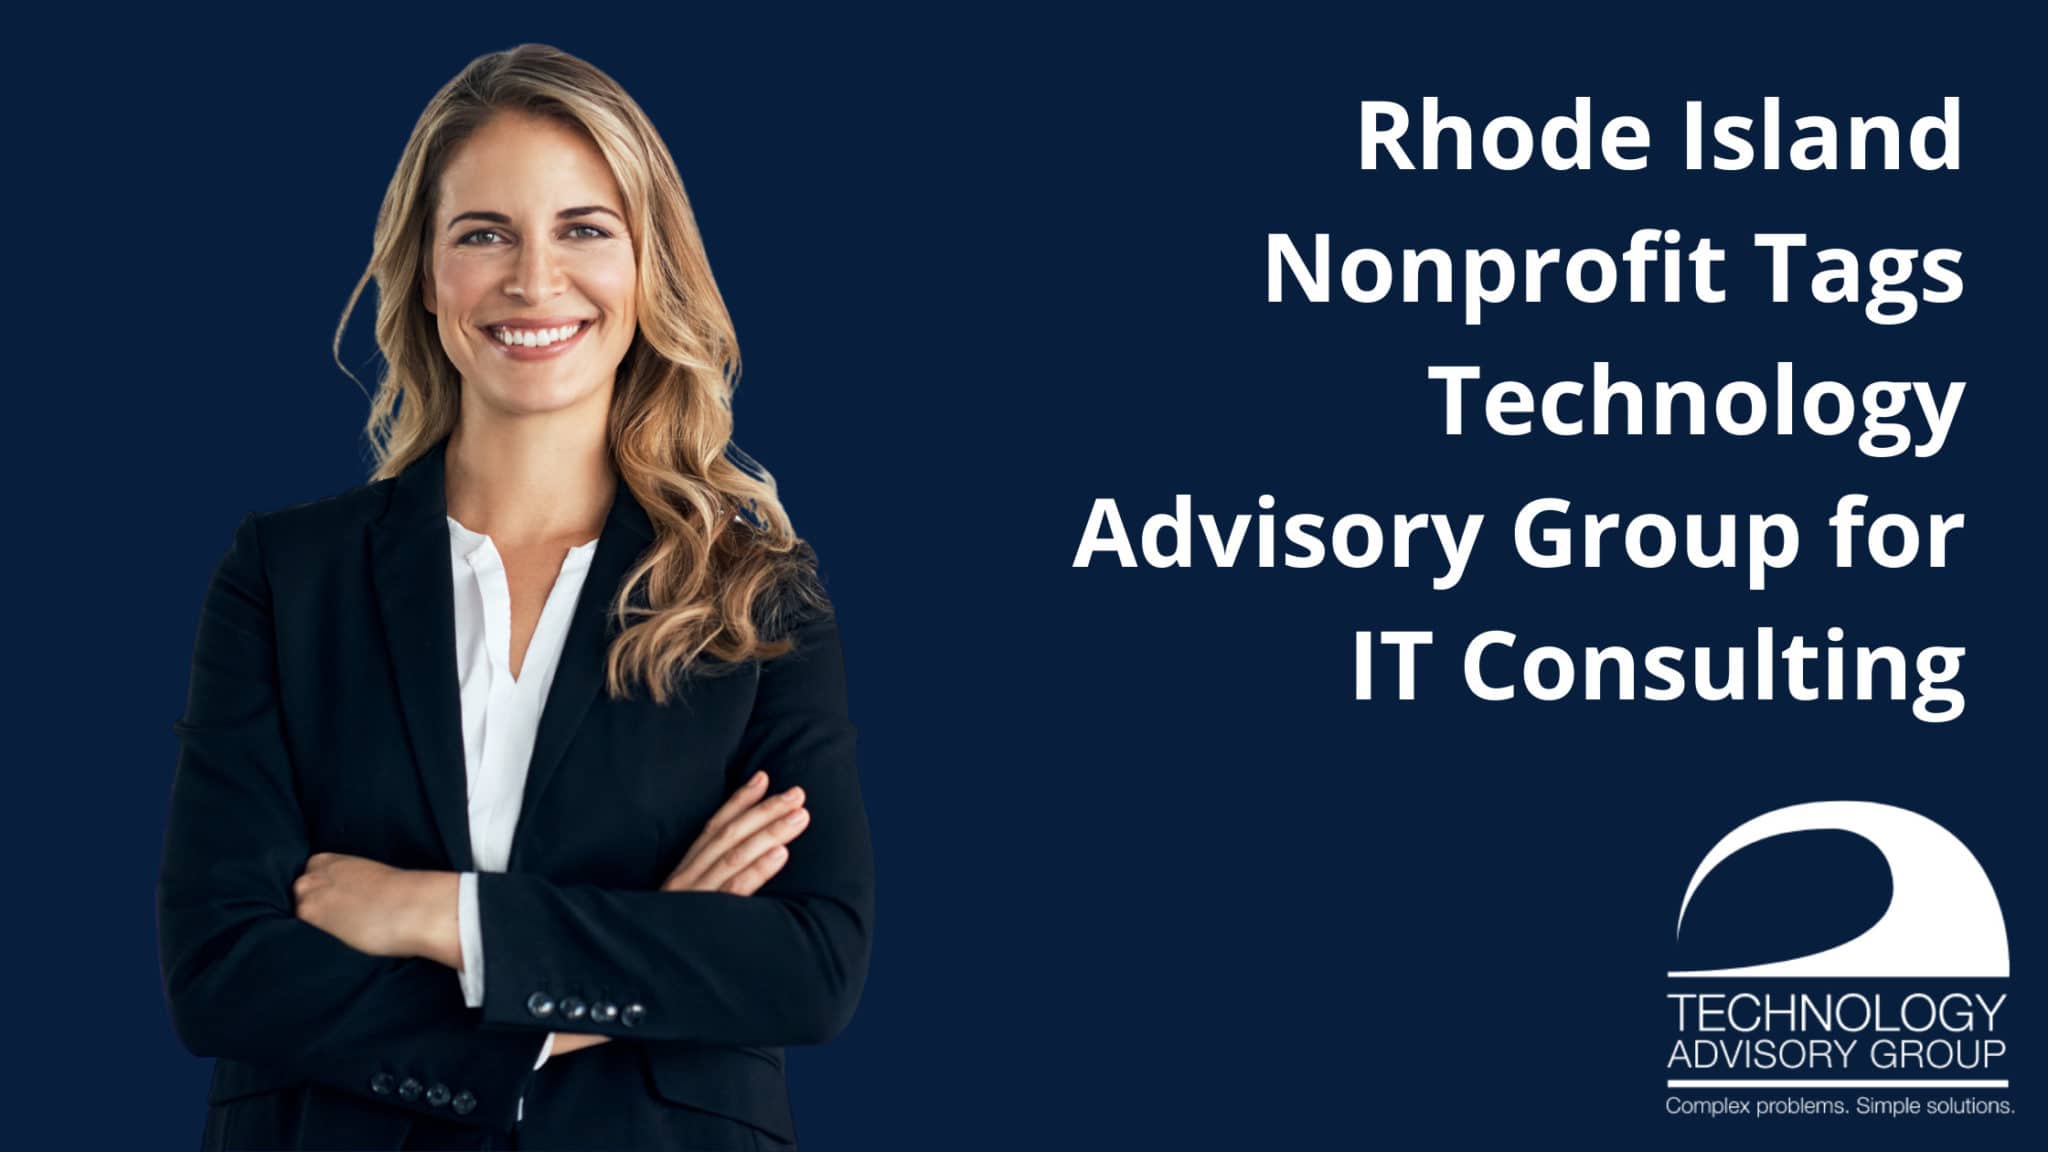 Rhode Island Nonprofit Tags Technology Advisory Group for IT Consulting